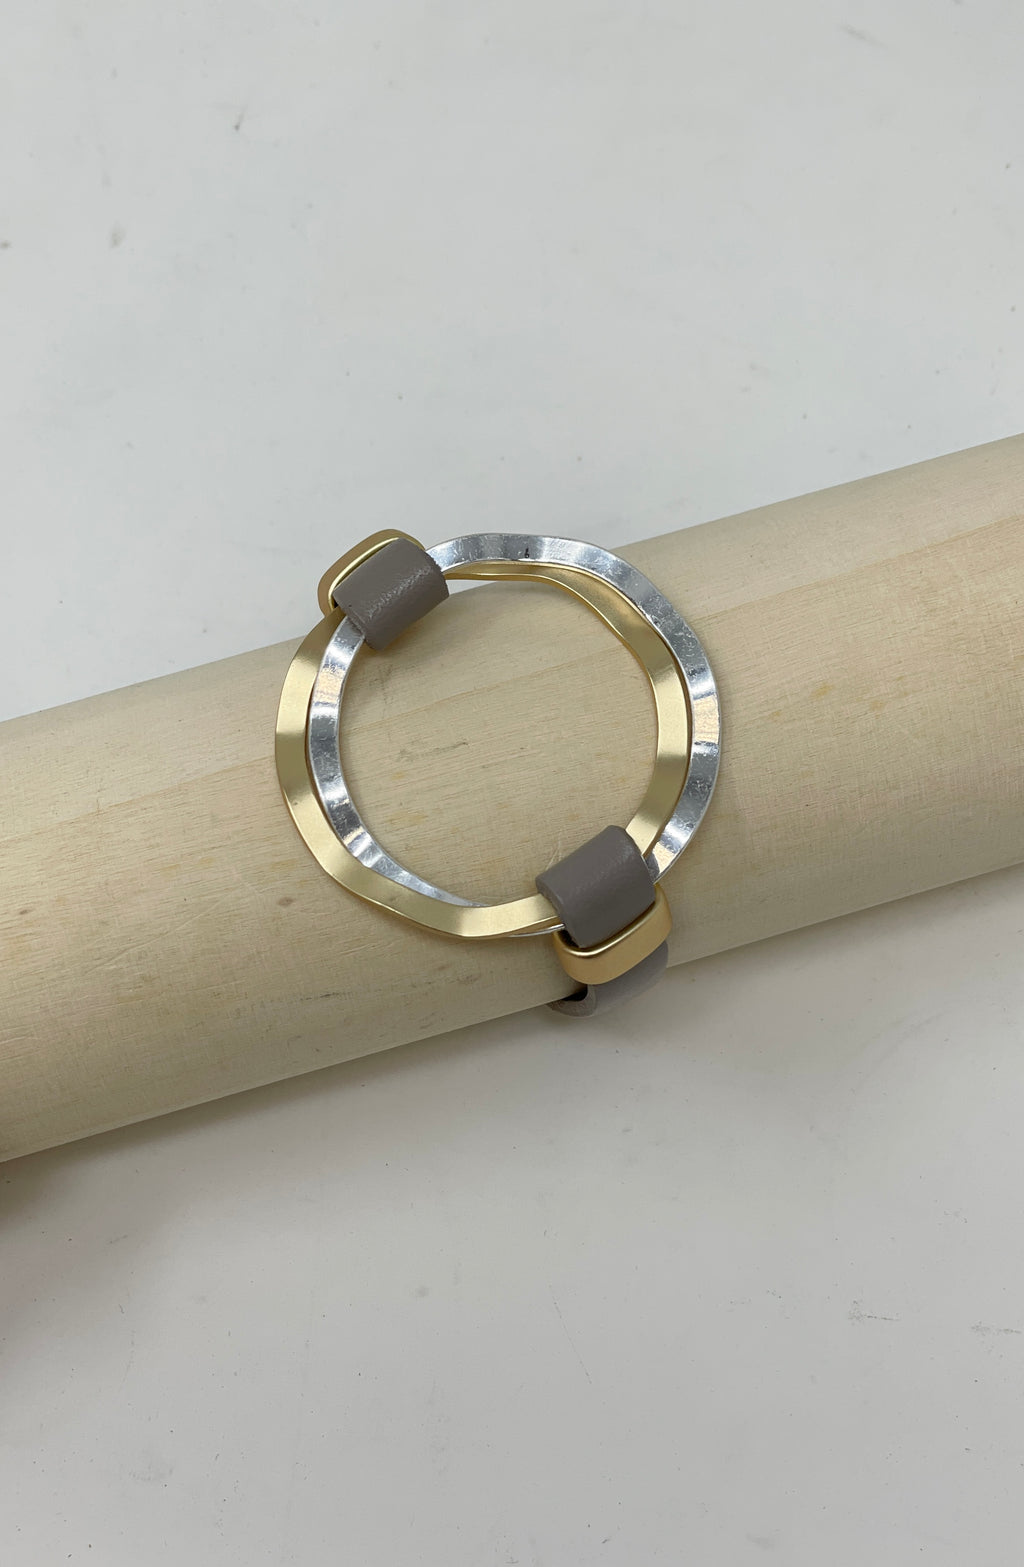 Gold and Silver Bracelet with Taupe Strap